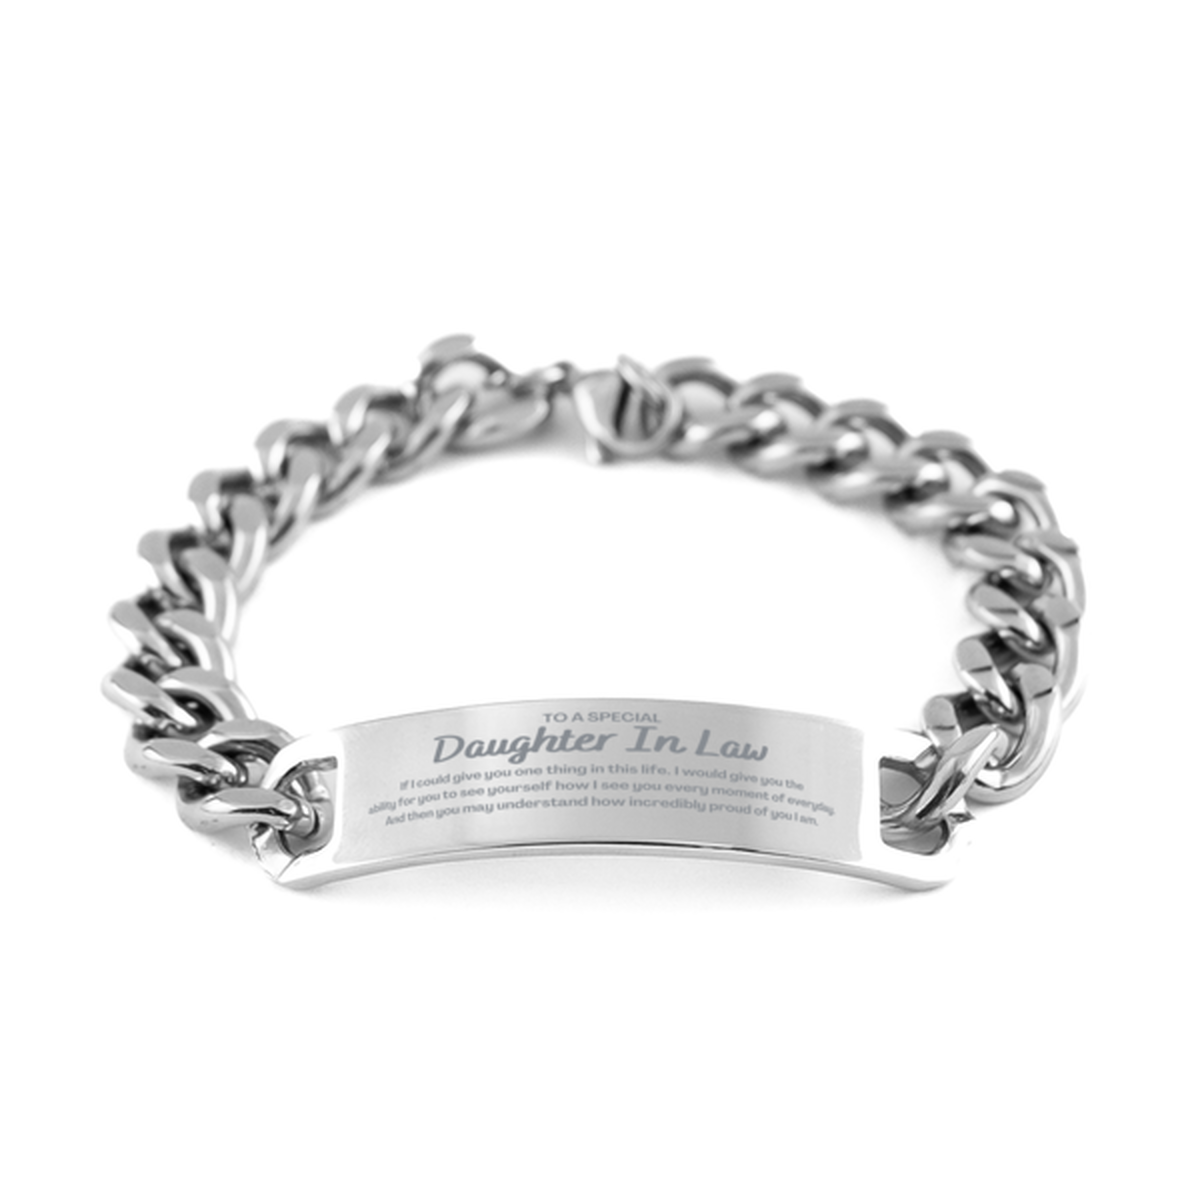 To My Daughter In Law Cuban Chain Stainless Steel Bracelet, Gifts For Daughter In Law Engraved, Inspirational Gifts for Christmas Birthday, Epic Gifts for Daughter In Law To A Special Daughter In Law how incredibly proud of you I am